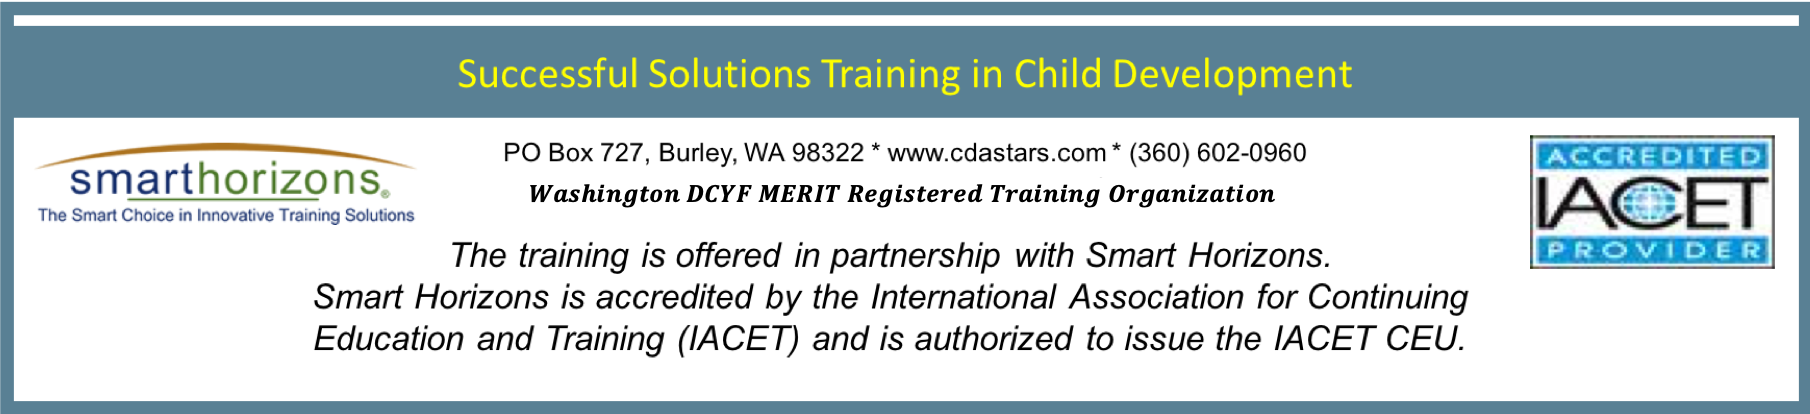 inservice training for child care in washington state